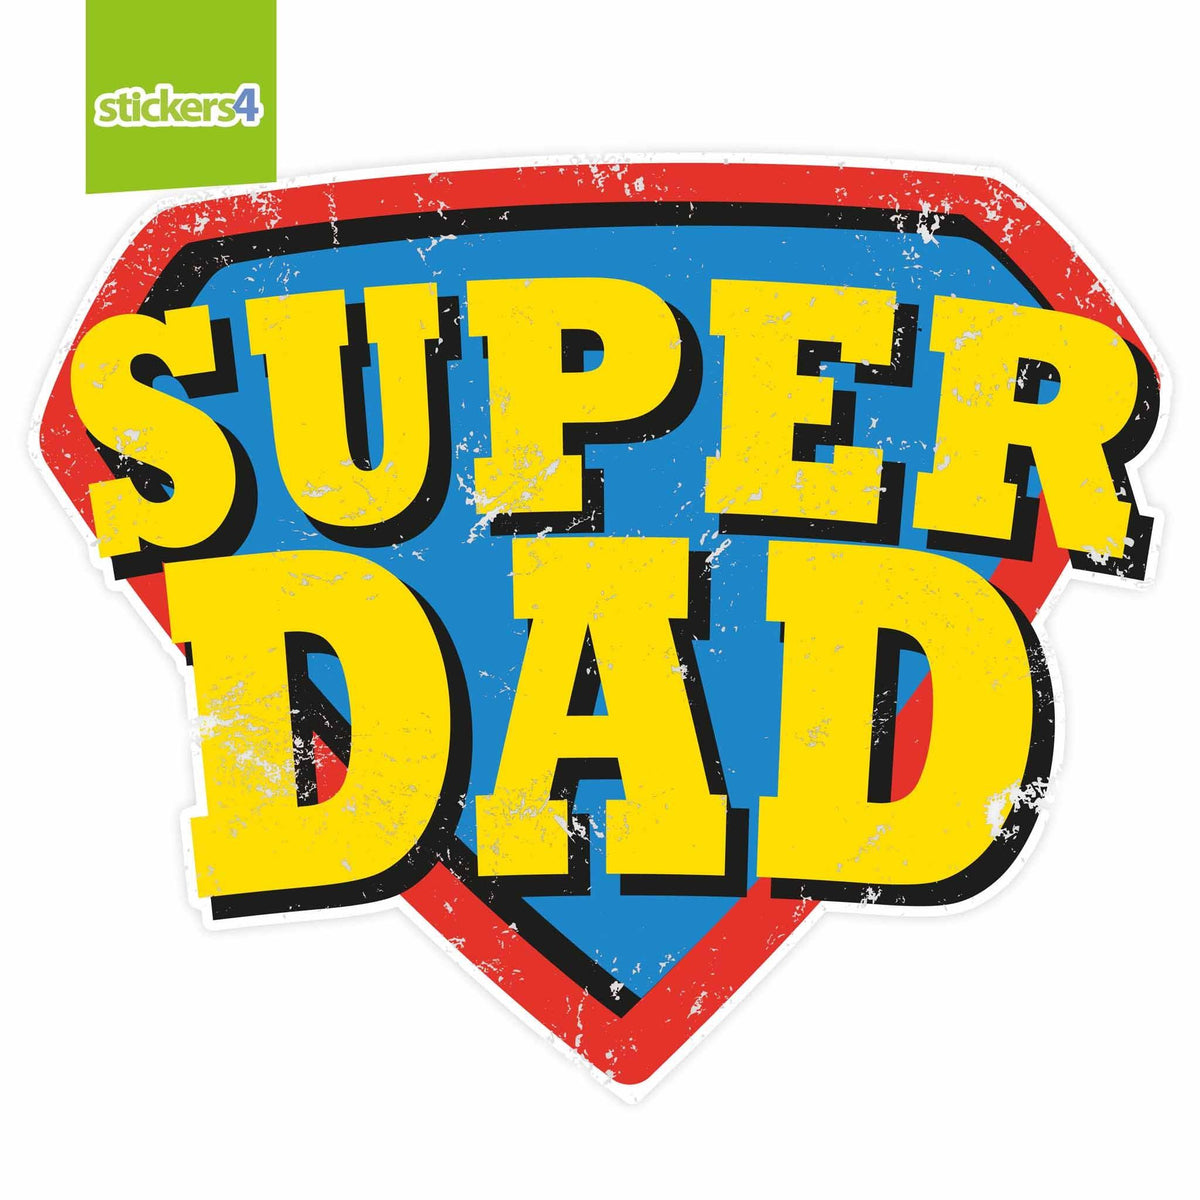 Super Dad Father&#39;s Day Window Cling Sticker (Vintage Style)